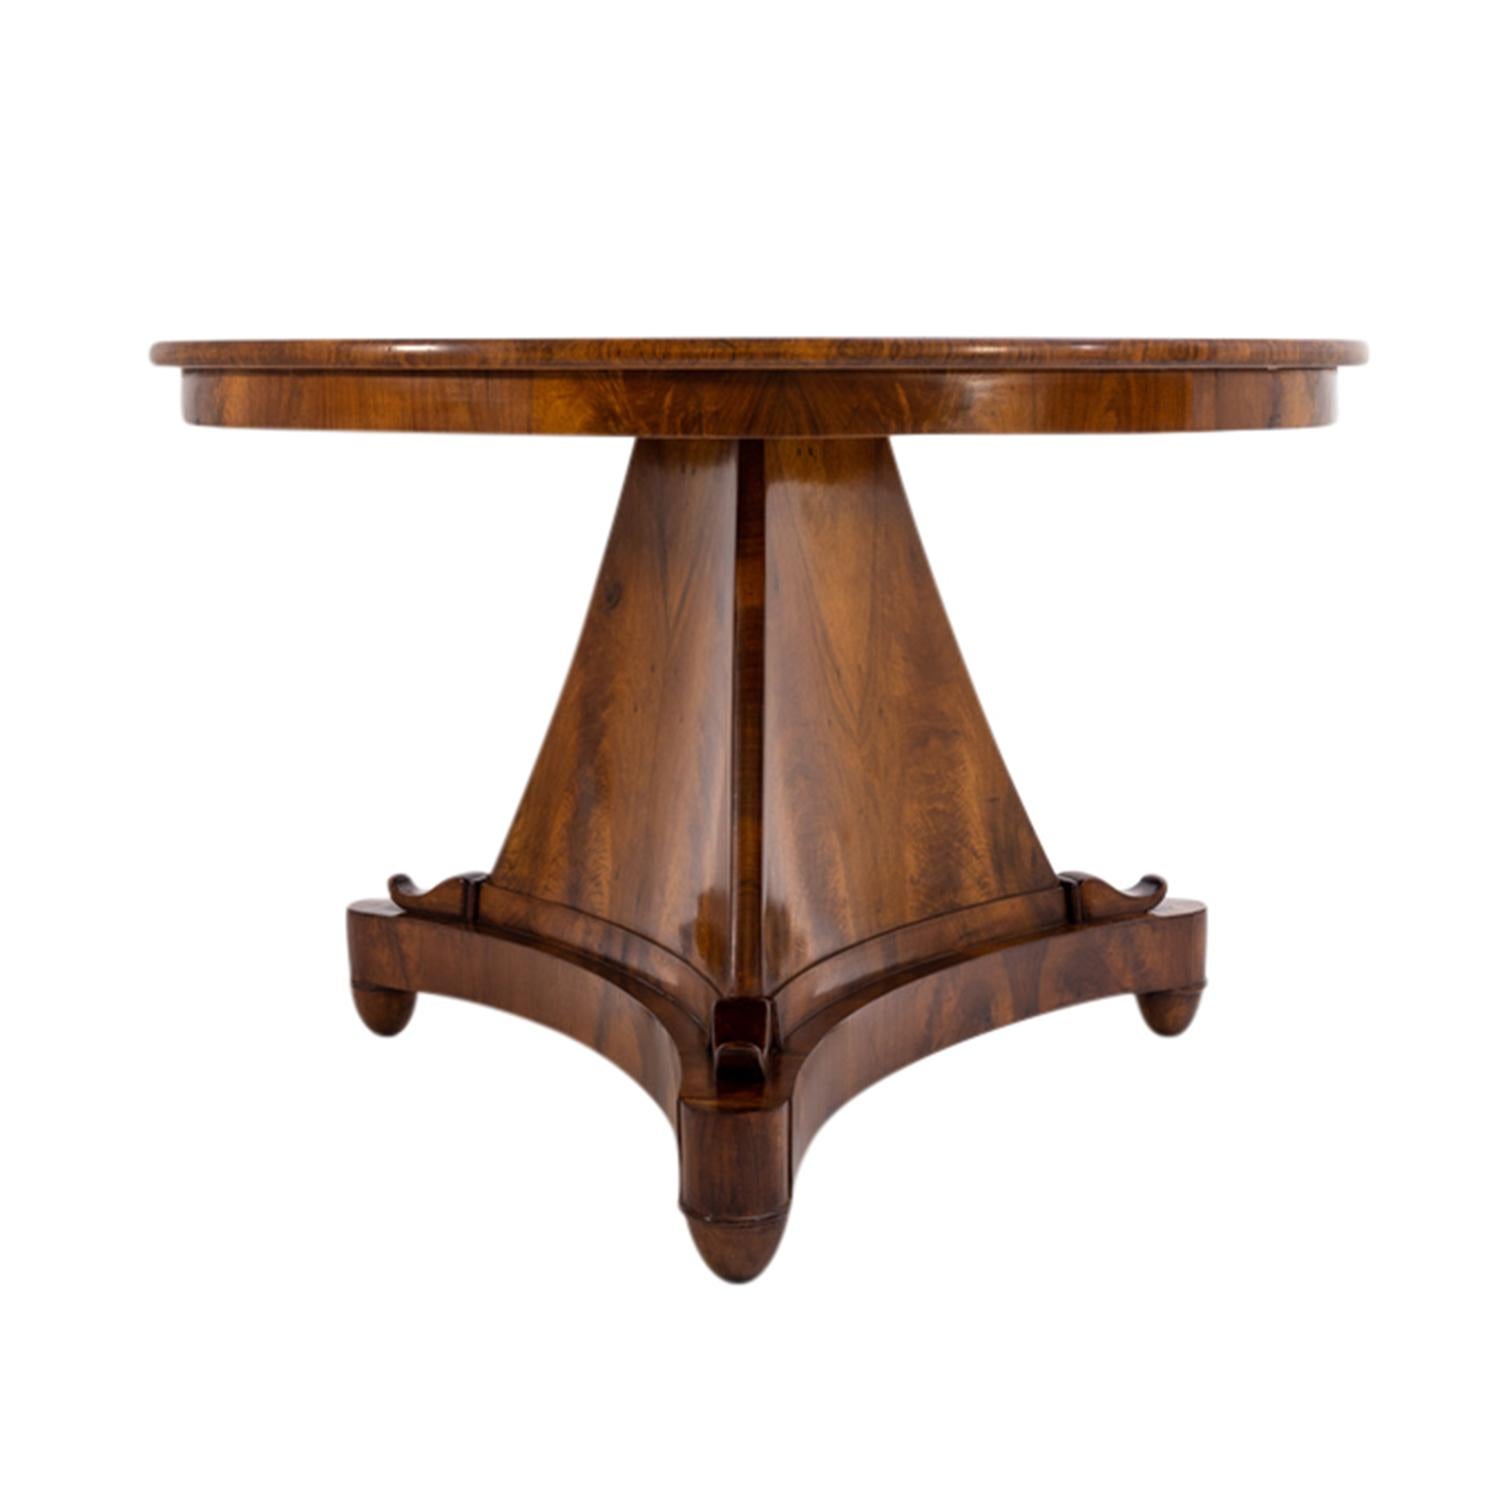 A round, antique early German Biedermeier center table made of hand crafted shellac polished Walnut, in good condition. The top of the detailed dining table is foldable, particularized by a star-shaped veneer pattern. The small table is supported by